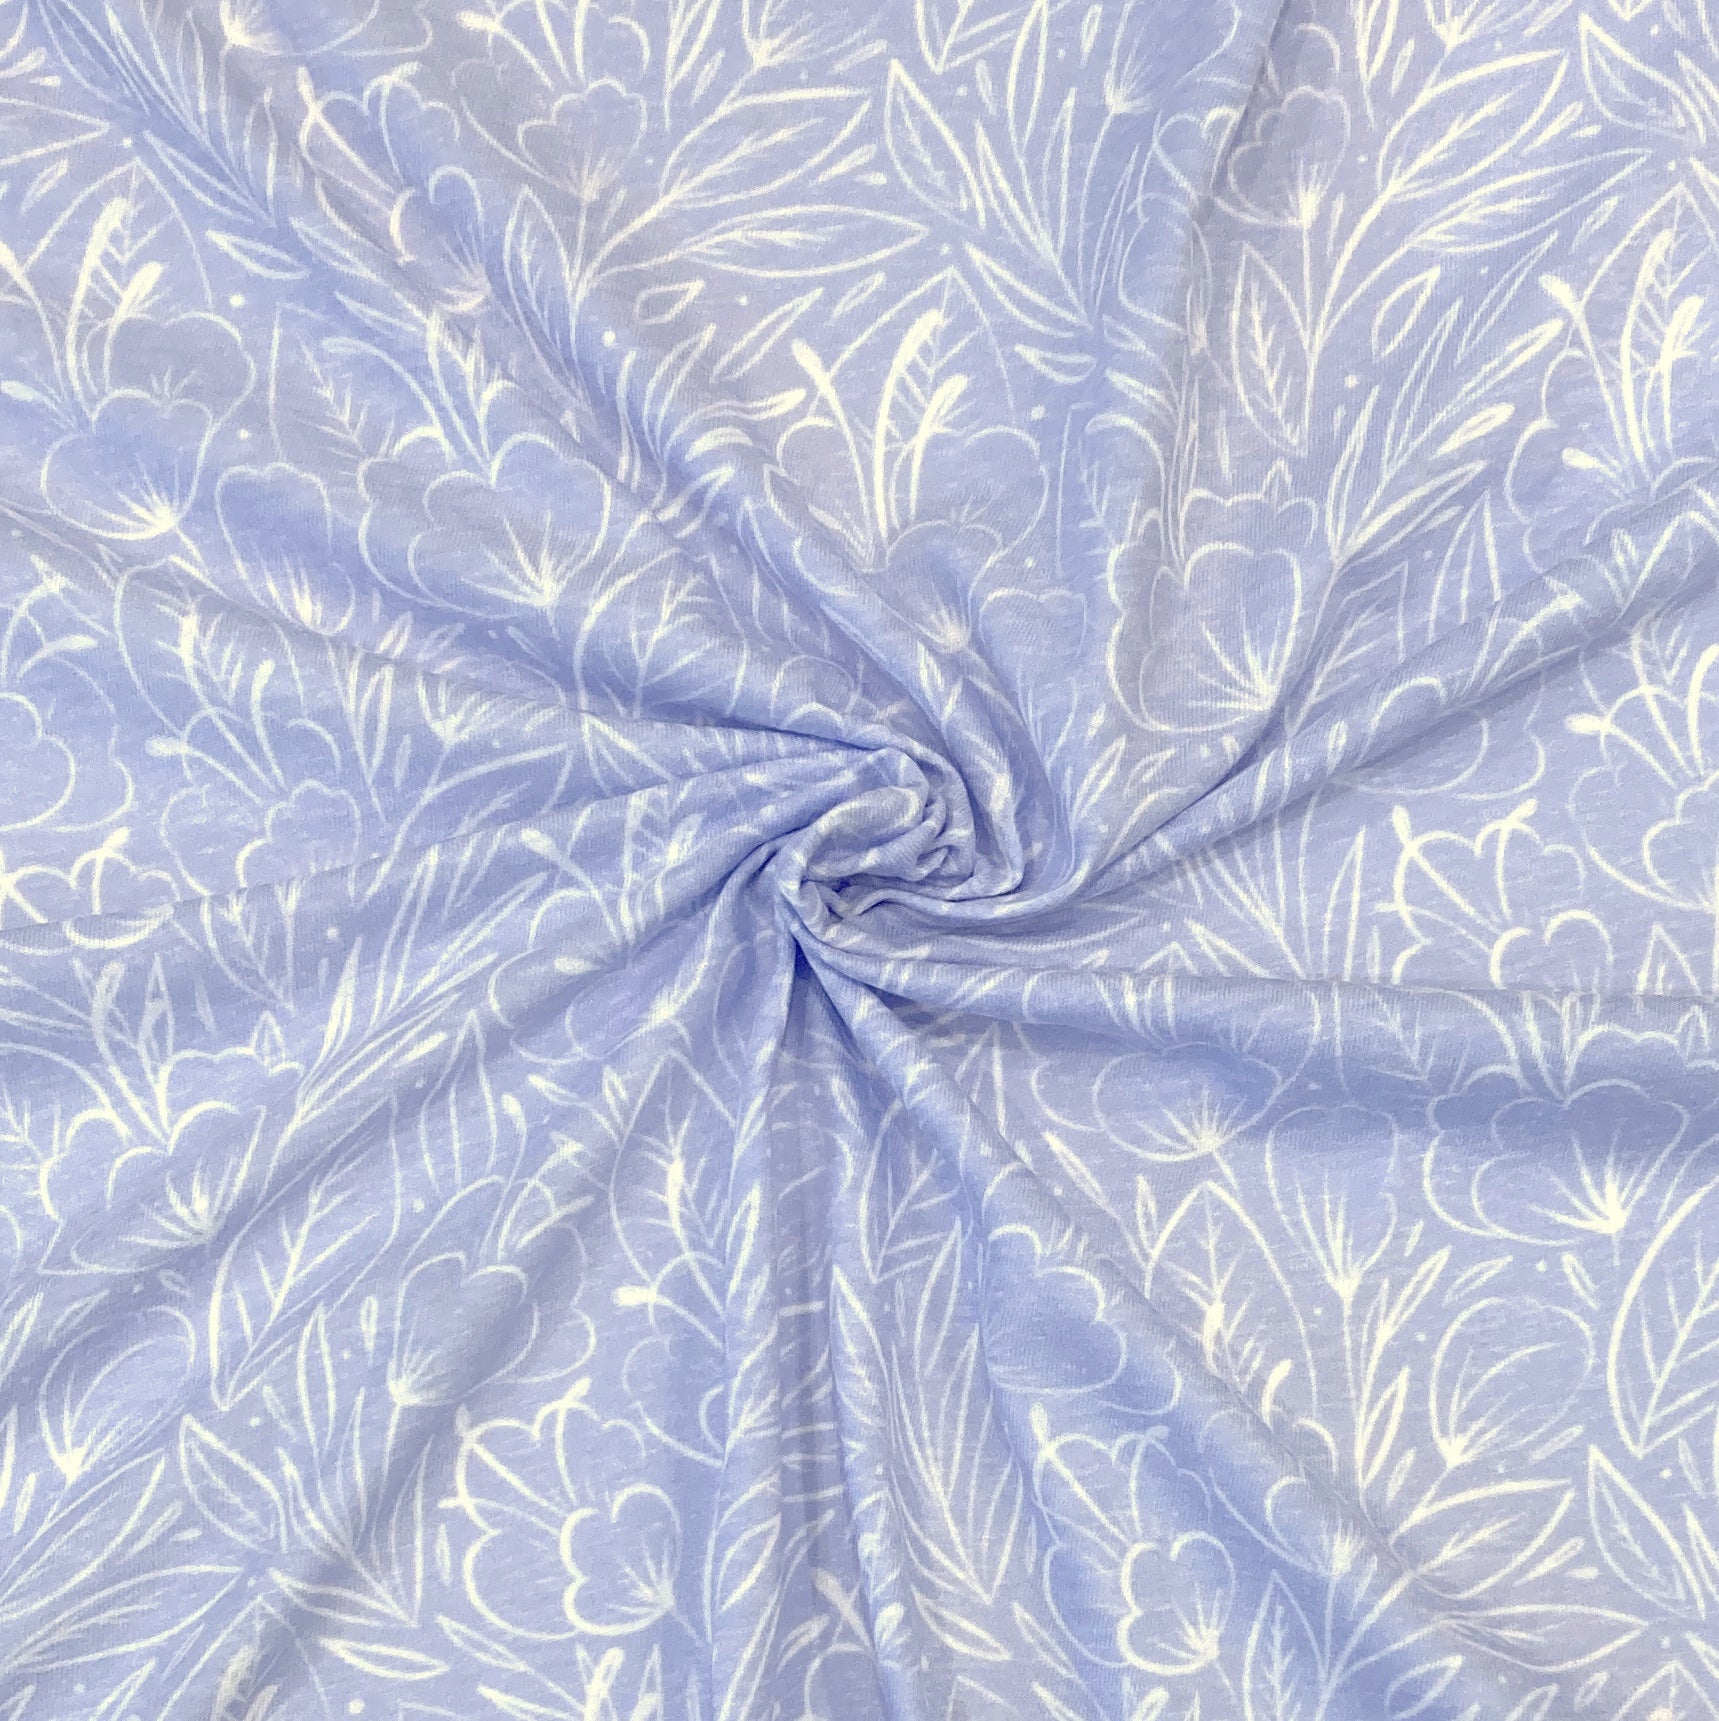 Lilac and White Line Drawn Floral Tri-Blend Jersey Knit Fabric, Sweet Tropical by Janelle Coury for CLUB Fabrics Fabric, Raspberry Creek Fabrics